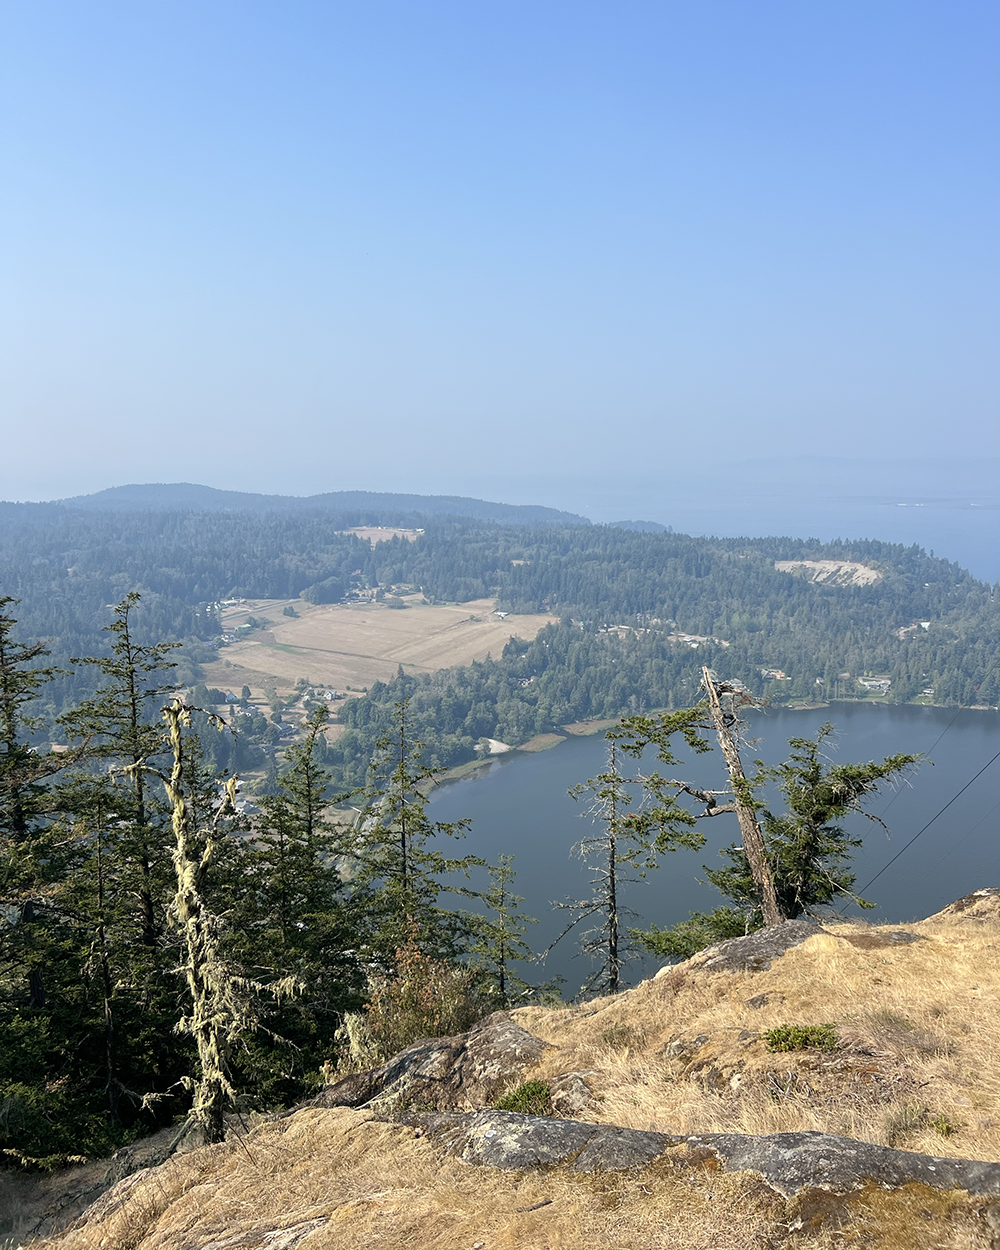  One of the best parts of climbing in Anacortes is the views you get, even when it’s a little smoky out. 